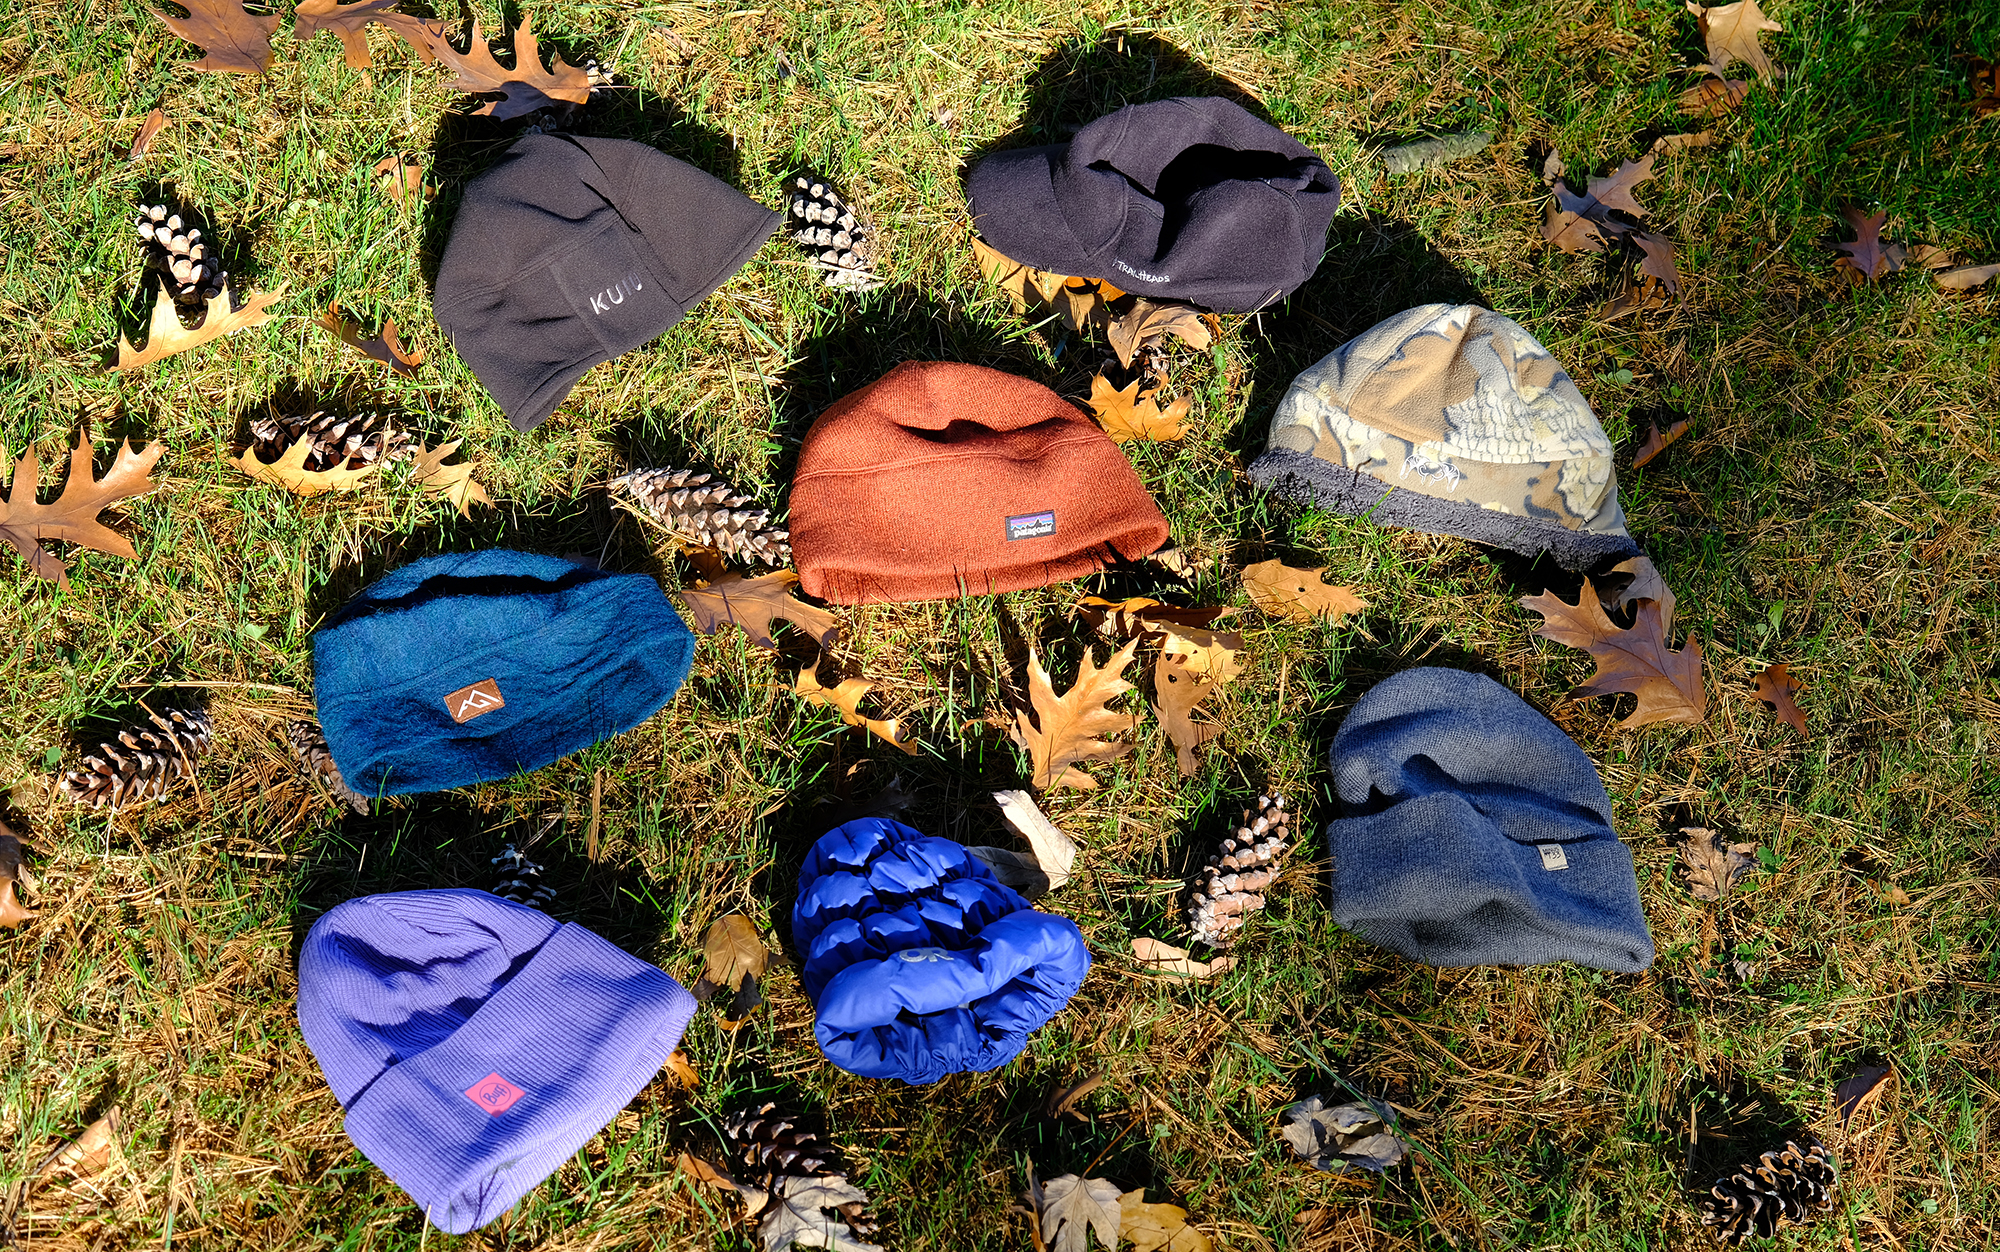 The best winter hats sit in the grass.